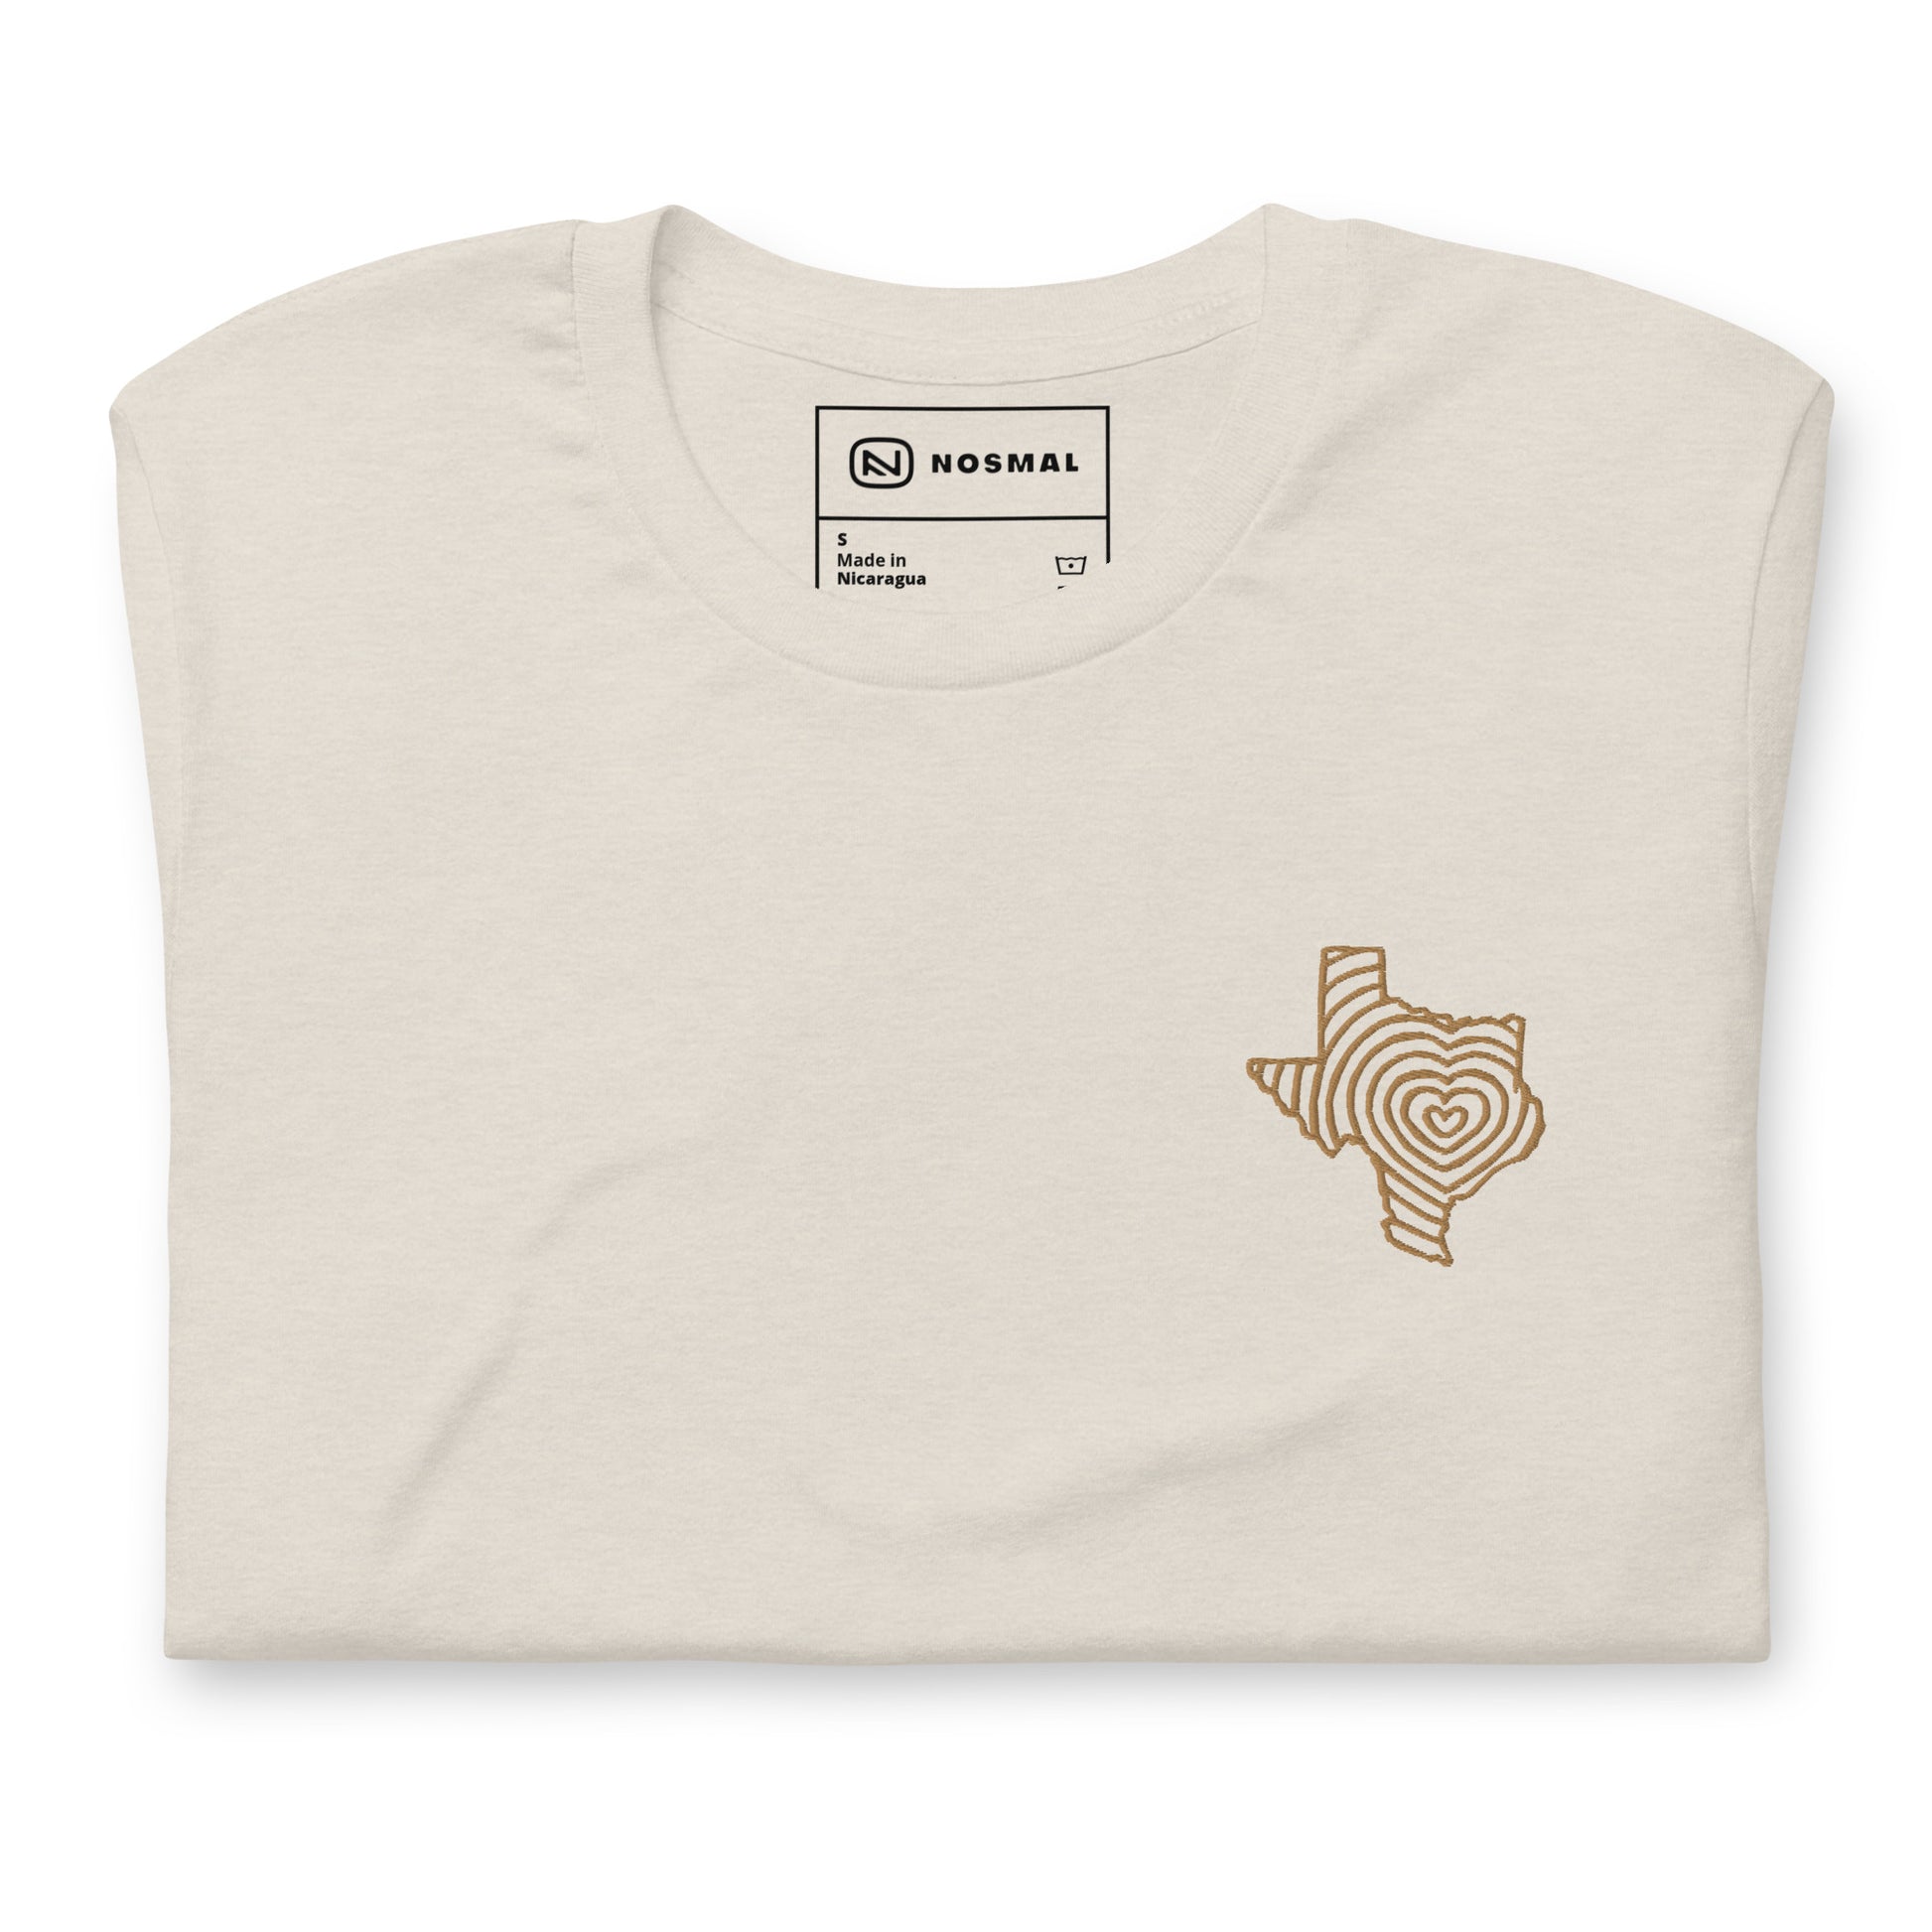 Top down view of heartbeat of texas gold embroidered design on heather dust unisex t-shirt.